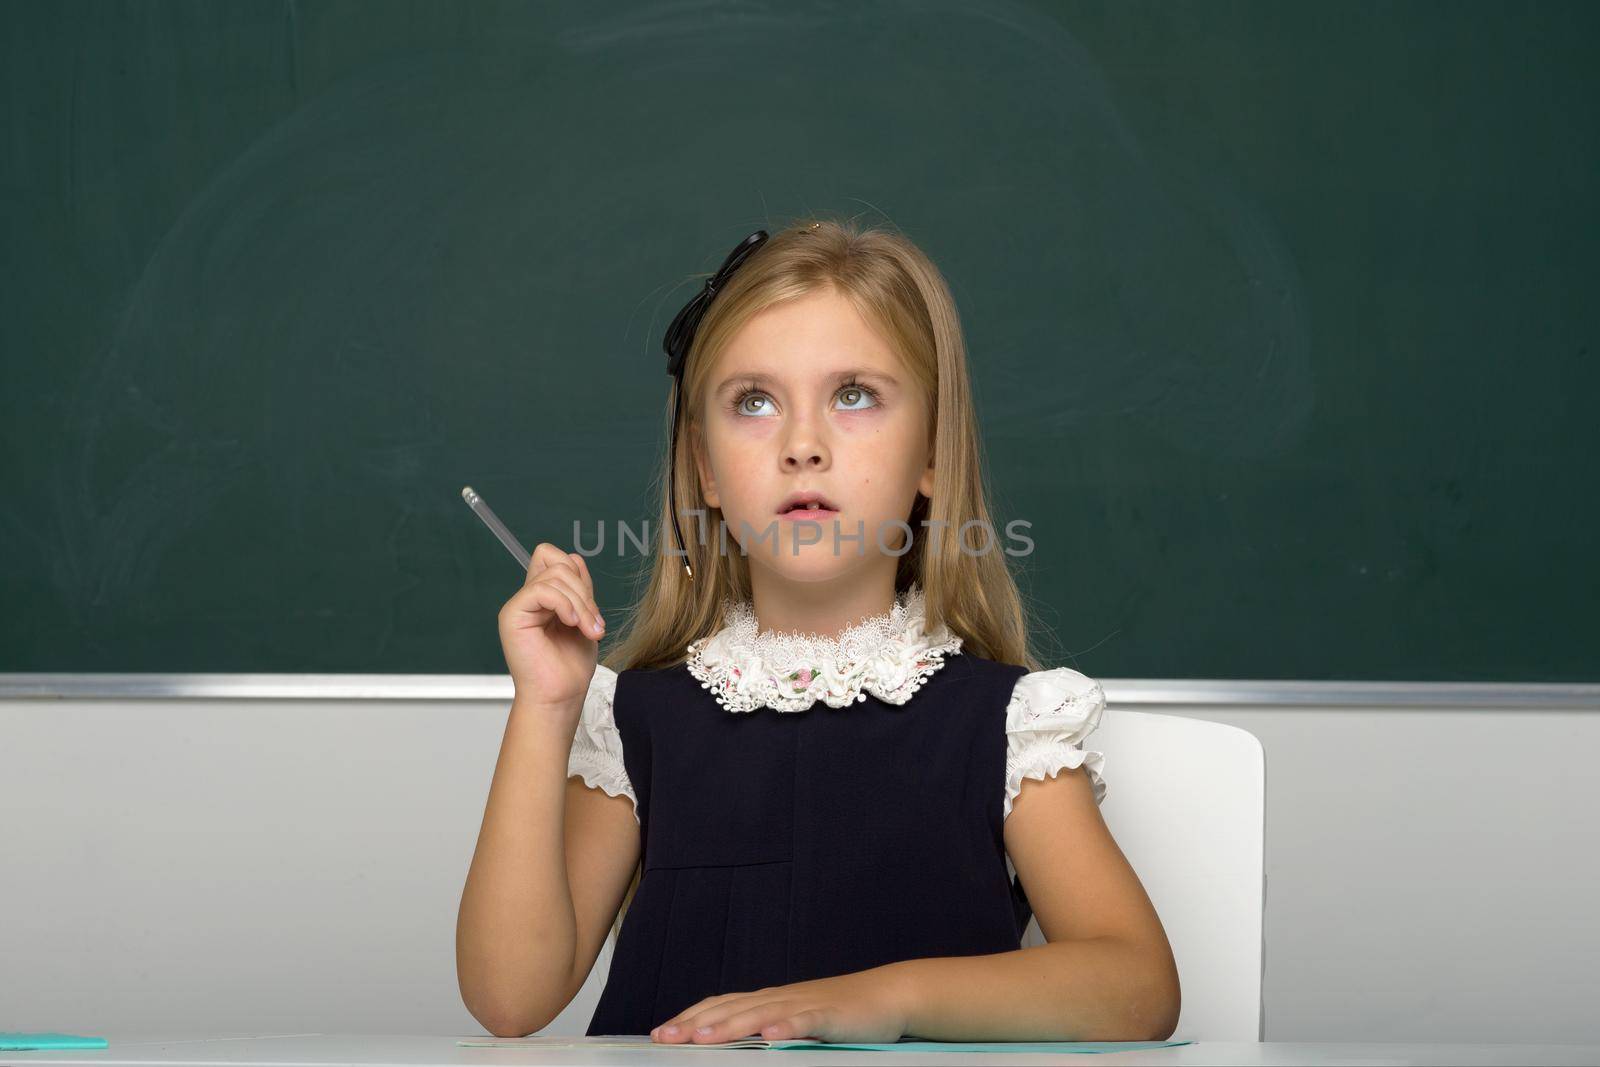 Girl thinking while sitting at desk at lesson. Beautiful blonde girl elementary school student posing on background of blackboard in classroom. School and education concept